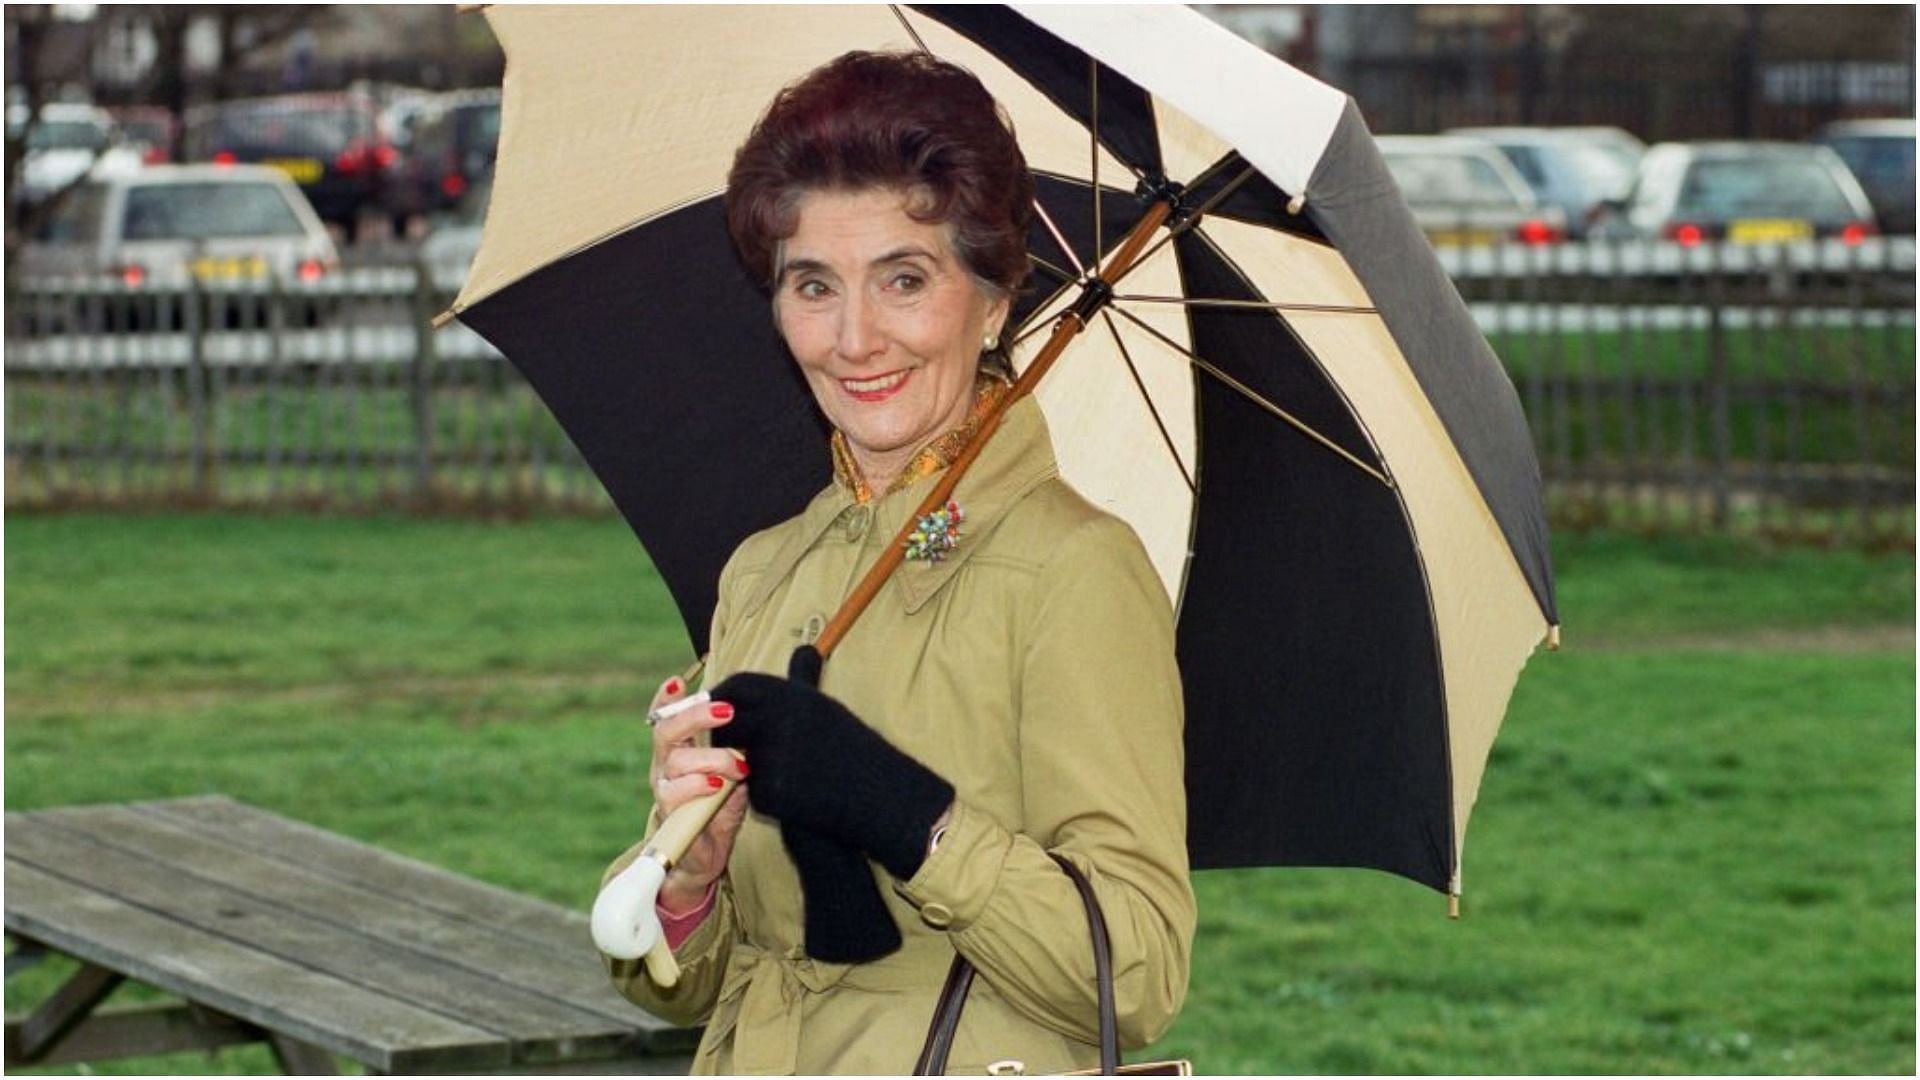 June Brown was mostly known for her role in EastEnders (Image via Alisdair MacDonald/Getty Images)